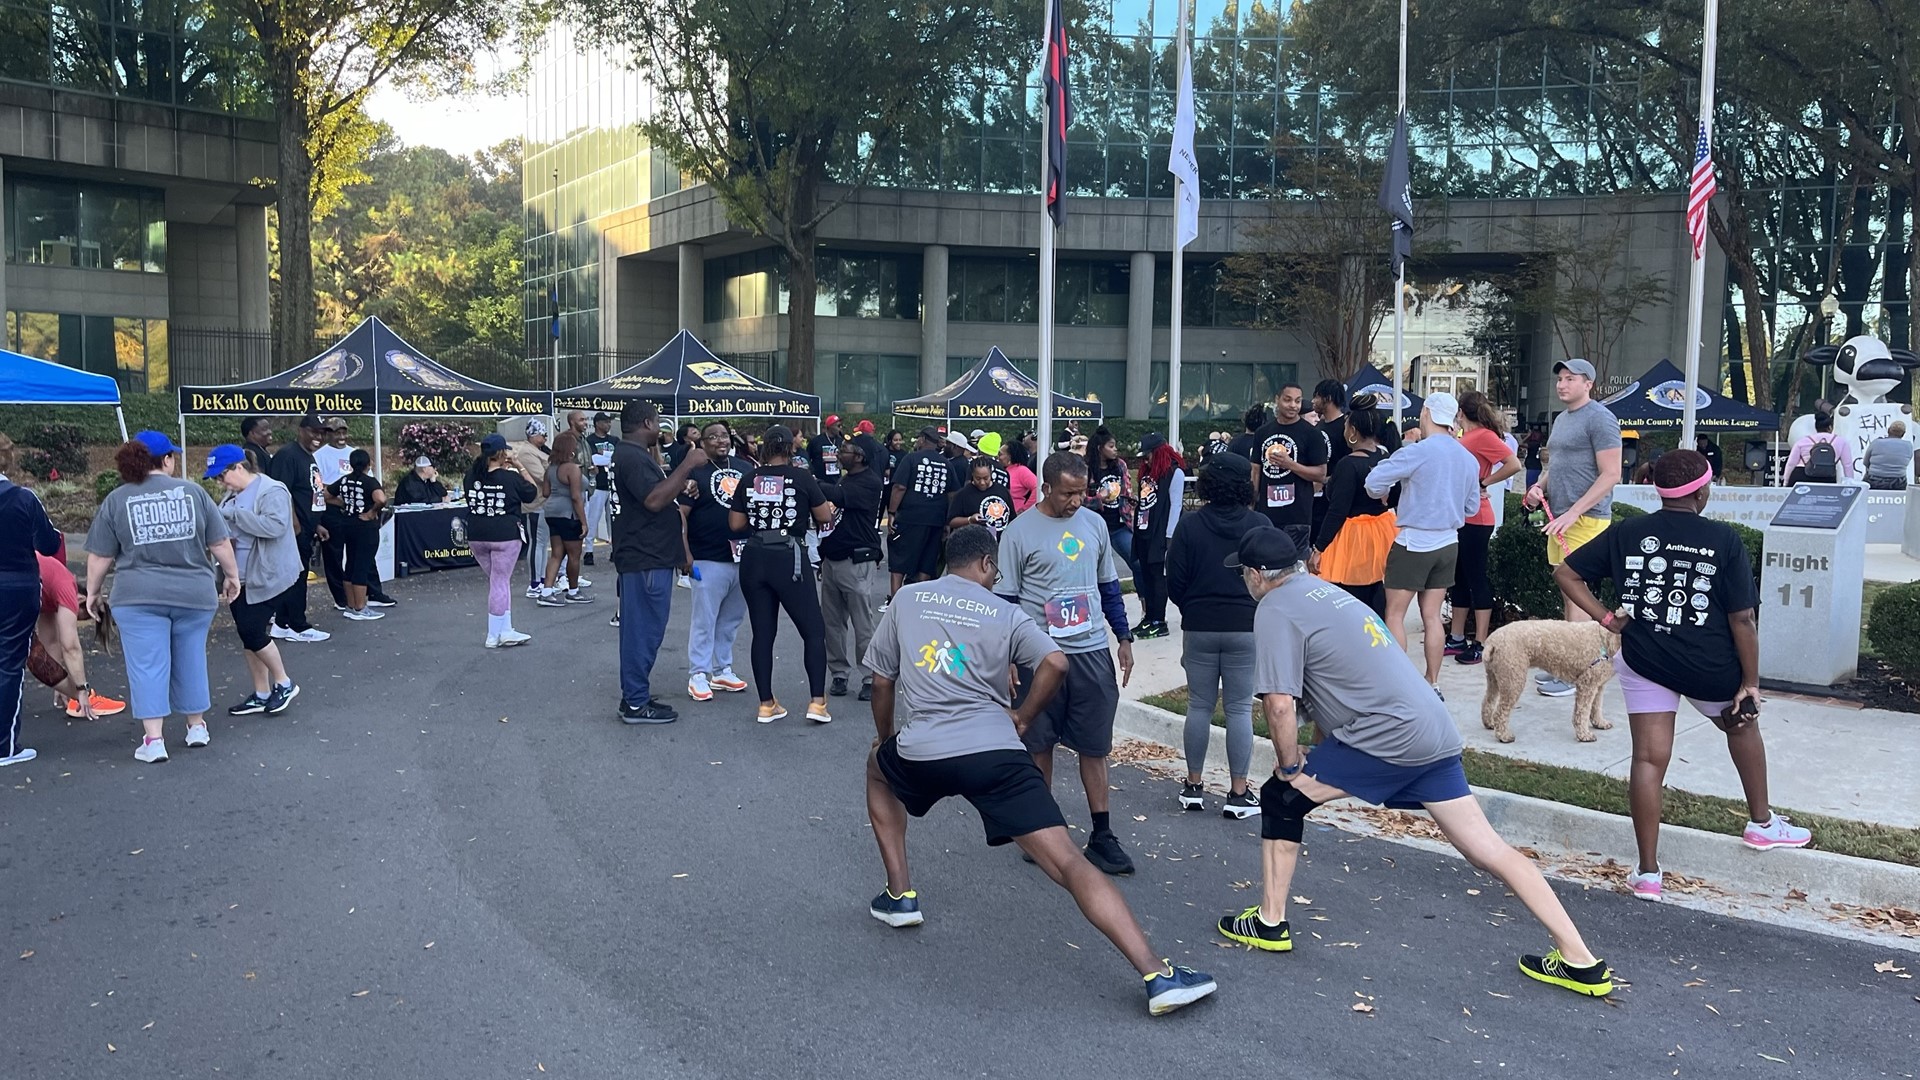 The DeKalb County PAL Plus 5K Race welcomes participants, rain or shine, with a Fall Fest and Halloween theme perfect for families.